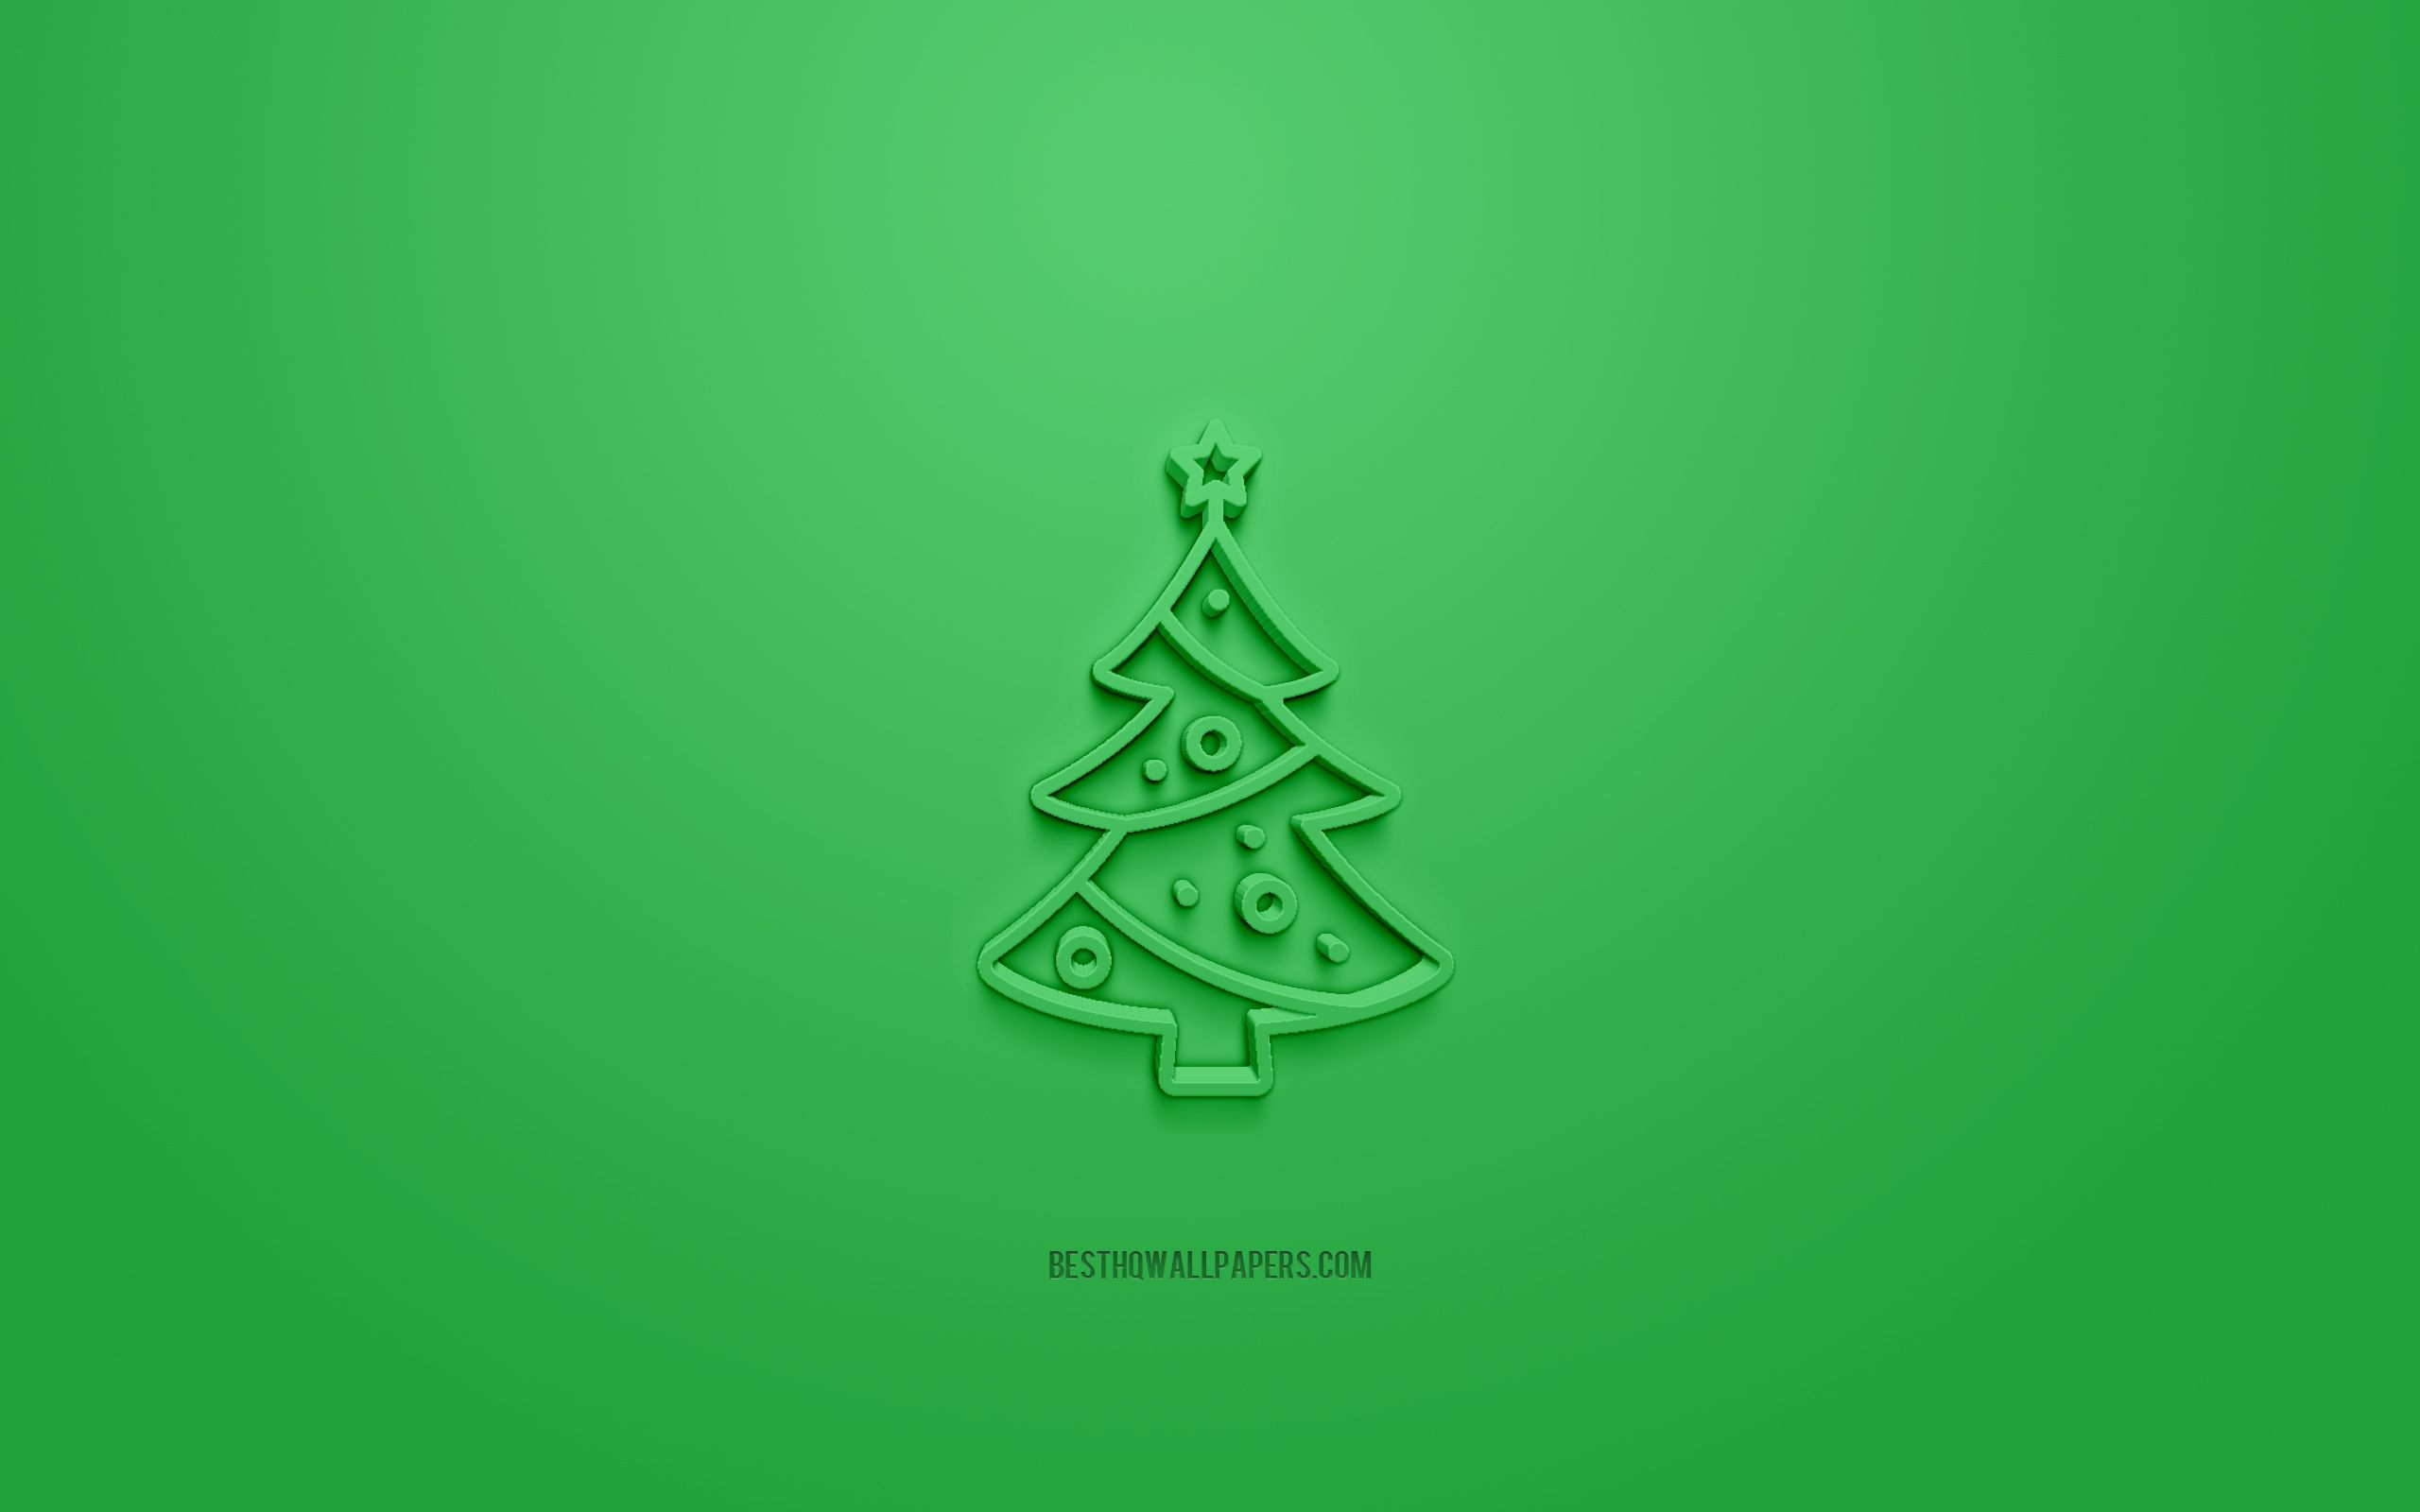 Download wallpaper Christmas Tree 3D icon, green background, 3D symbols, Christmas Tree, creative 3D art, 3D icons, Christmas Tree sign, Christmas 3D icons for desktop with resolution 2560x1600. High Quality HD picture